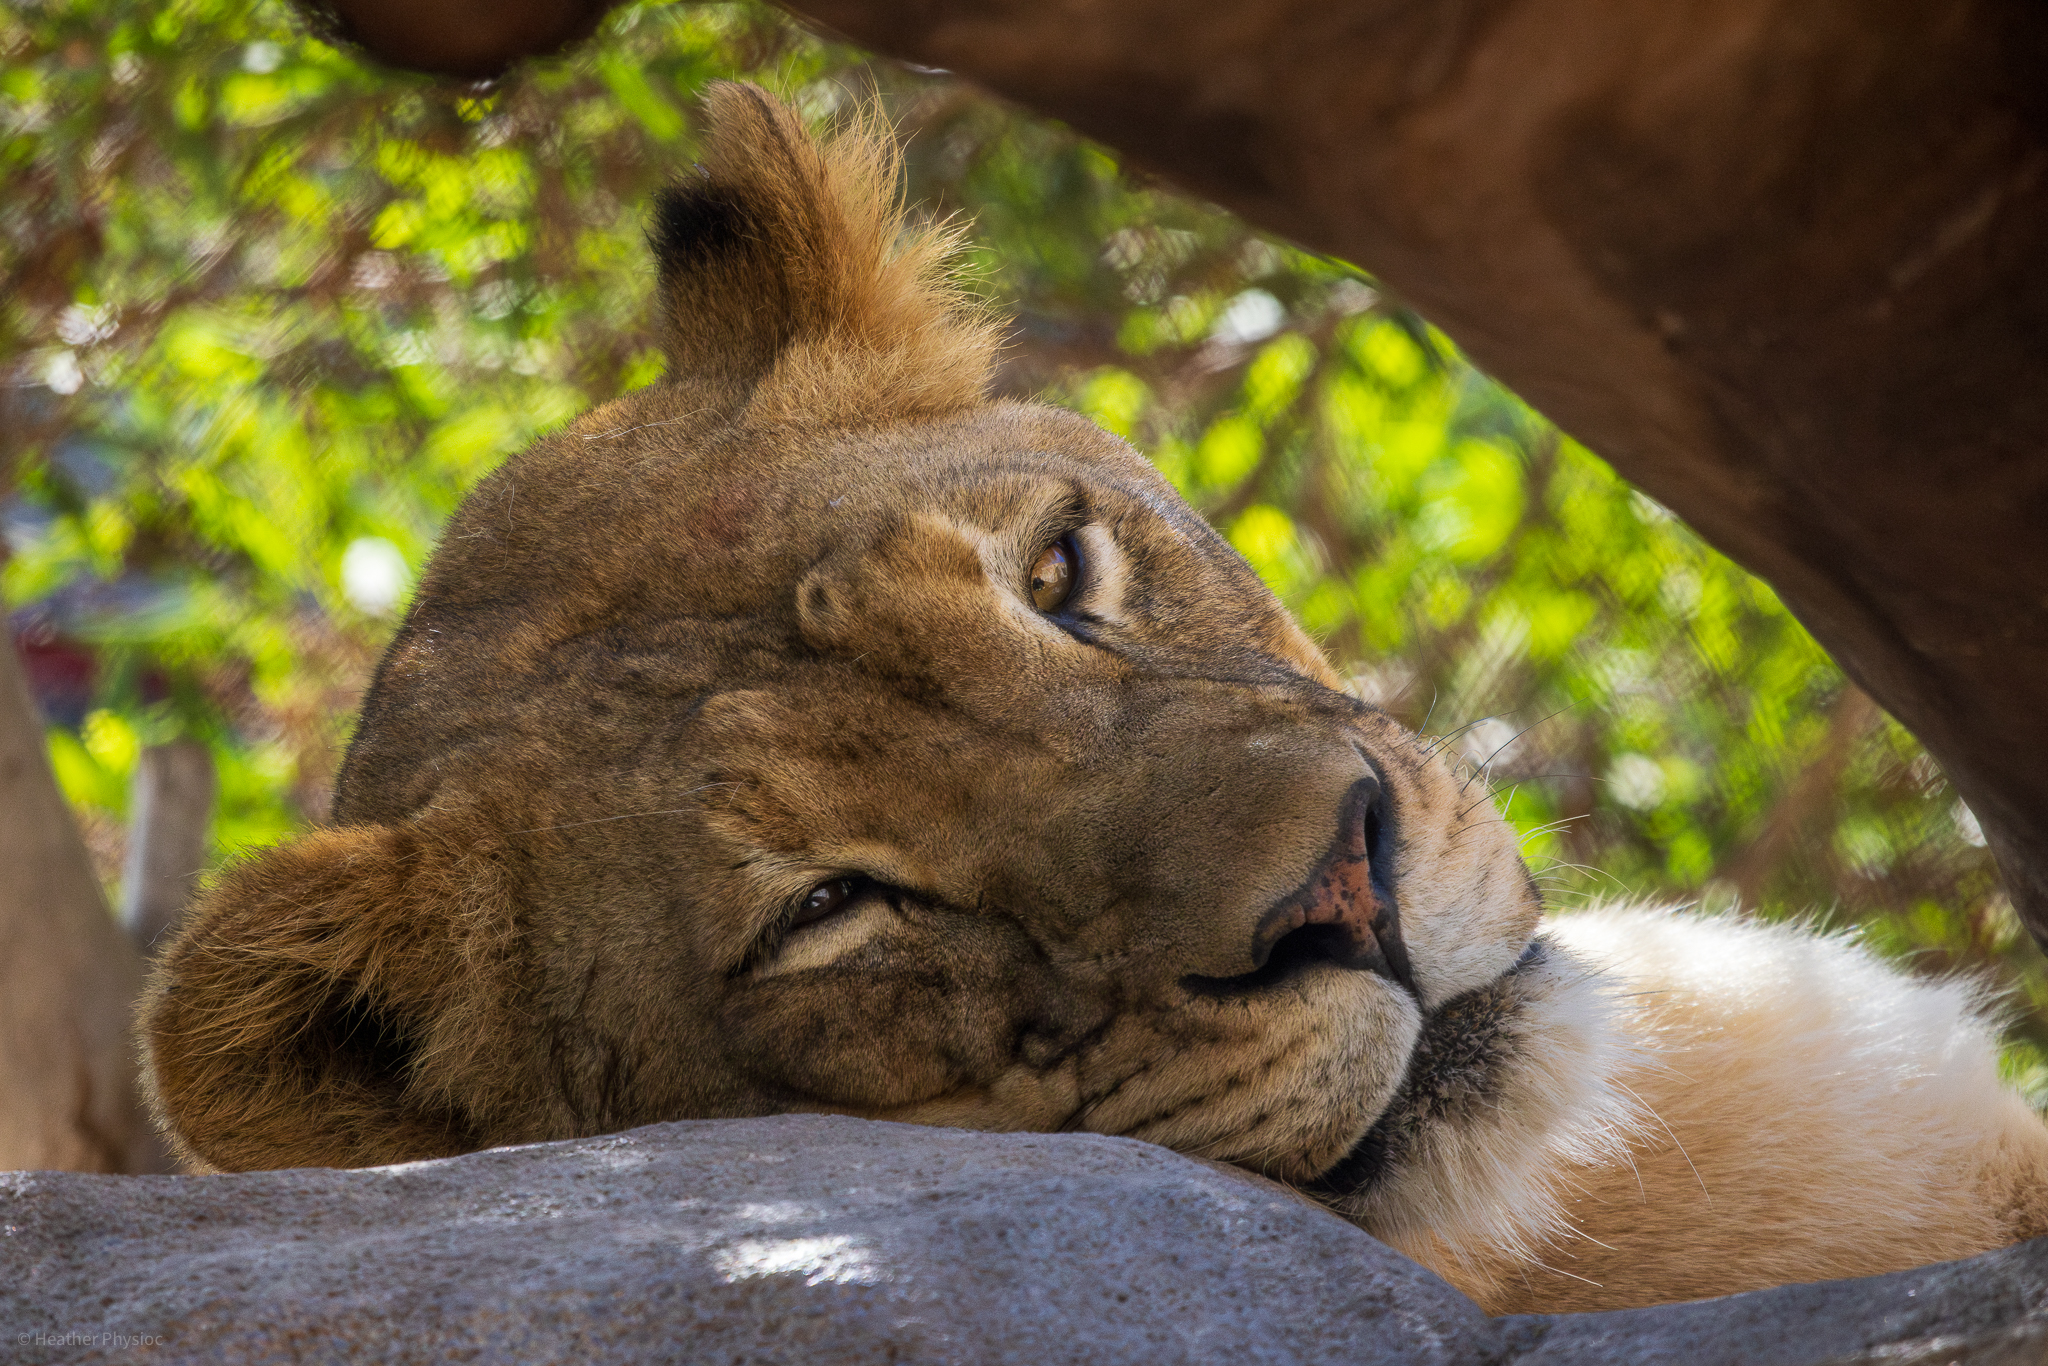 Lioness lounging in the shade at the San Diego Zoo